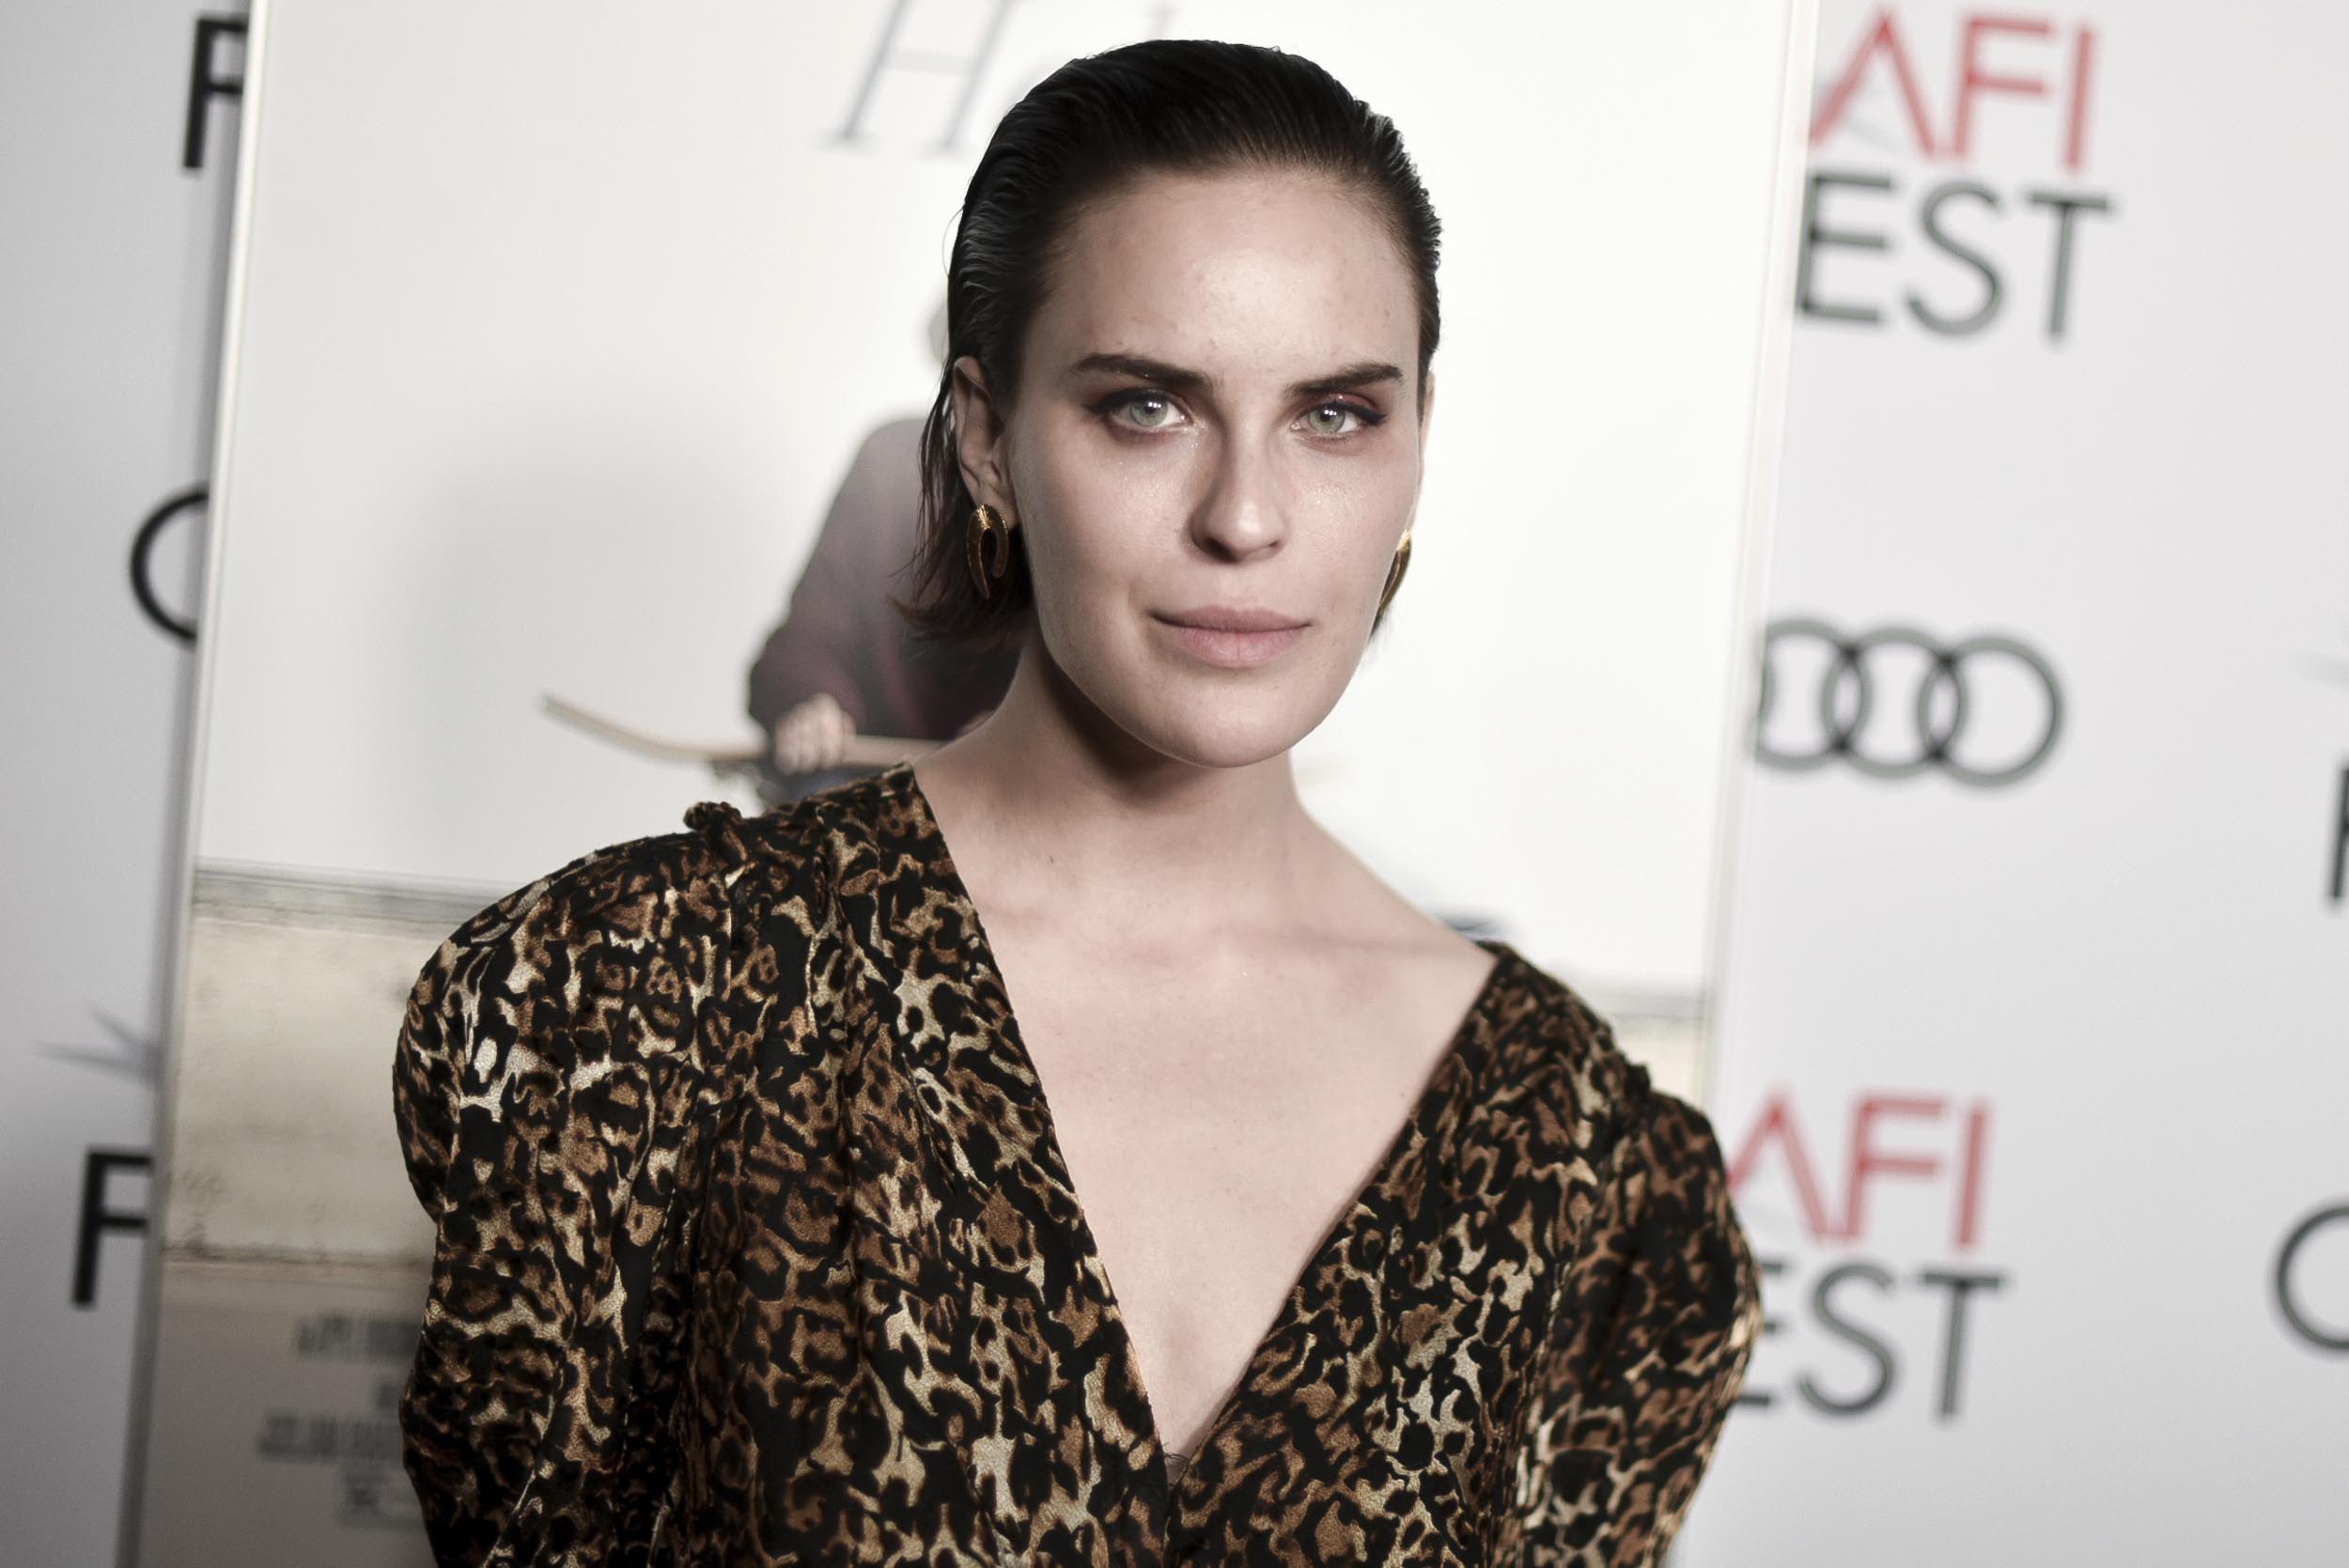 PHOTO: In this Nov. 18, 2019, file photo, Tallulah Willis attends 2019 AFI Fest - "Hala" at the TCL Chinese Theatre, in Los Angeles.